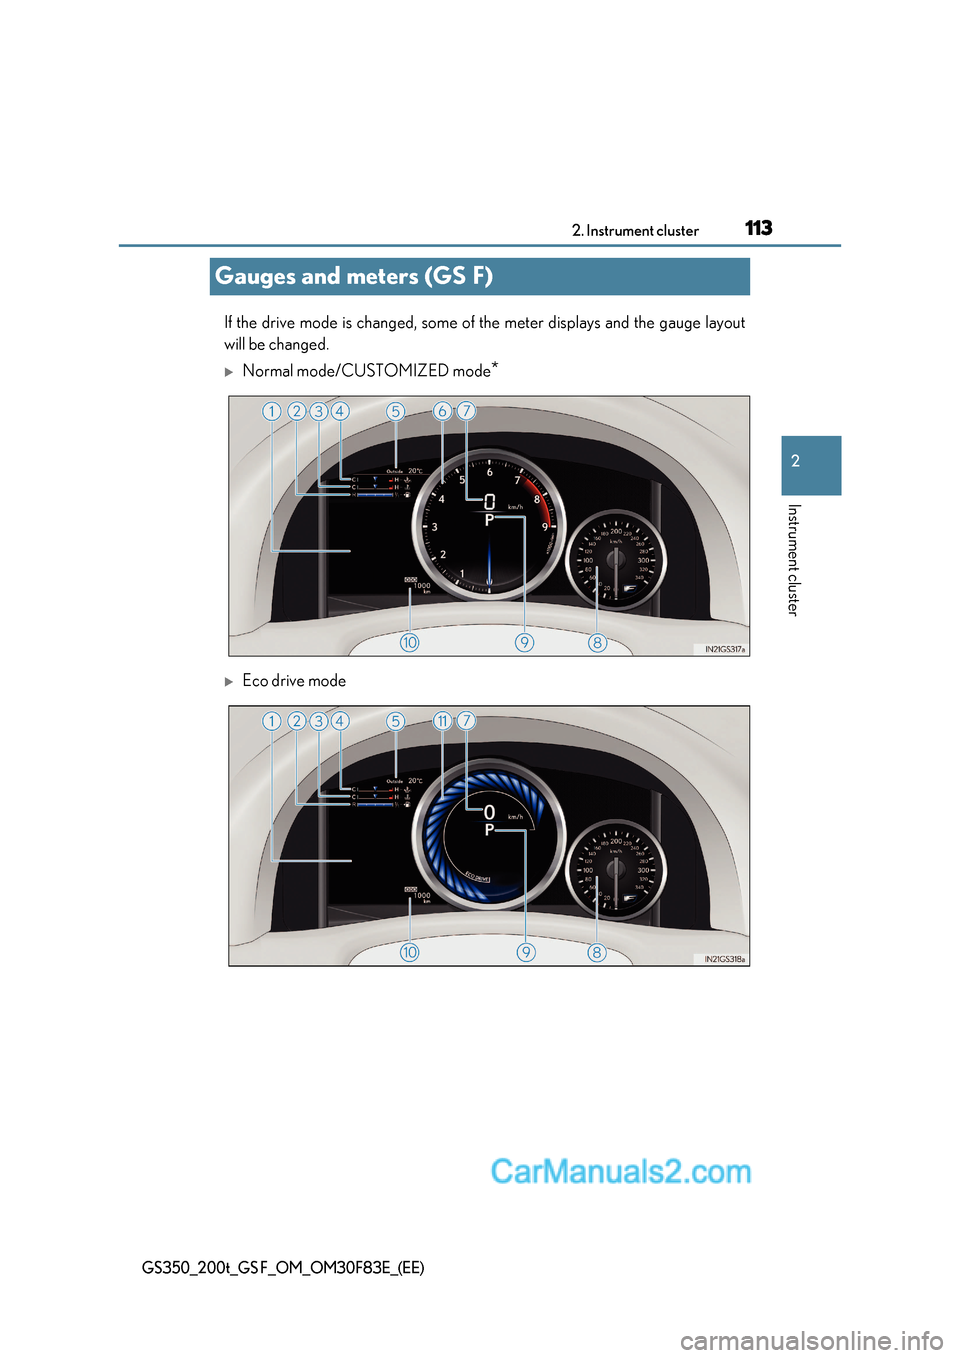 Lexus GS F 2017  Owners Manual 113
2
2. Instrument cluster
Instrument cluster
GS350_200t_GS F_OM_OM30F83E_(EE)
Gauges and meters (GS F)
If the drive mode is changed, some of the meter displays and the gauge layout
will be changed.
